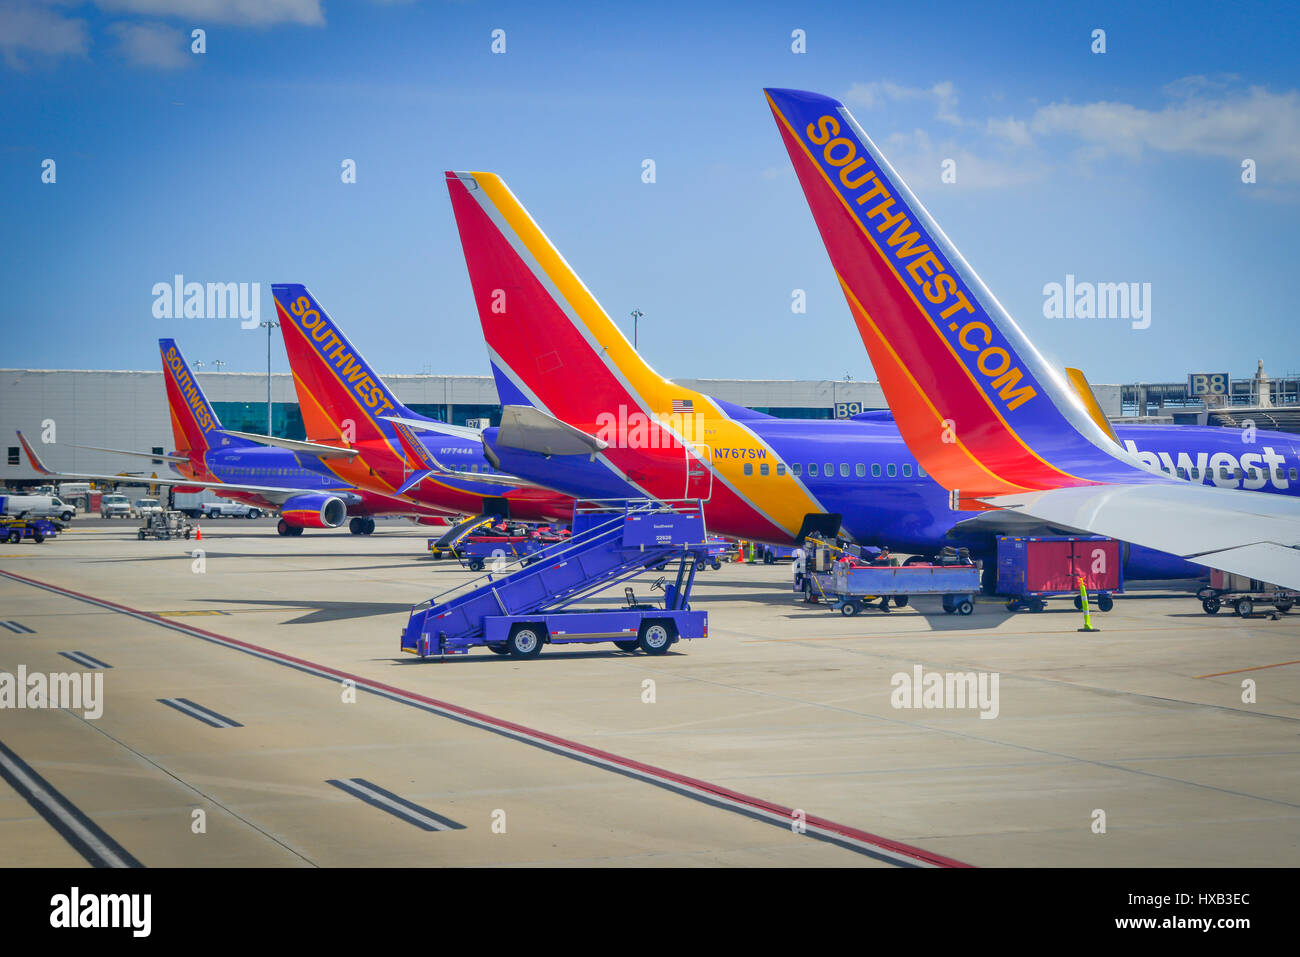 View of parked commercial airplanes at gates being serviced and having luggage loadied in preparation for flight Stock Photo